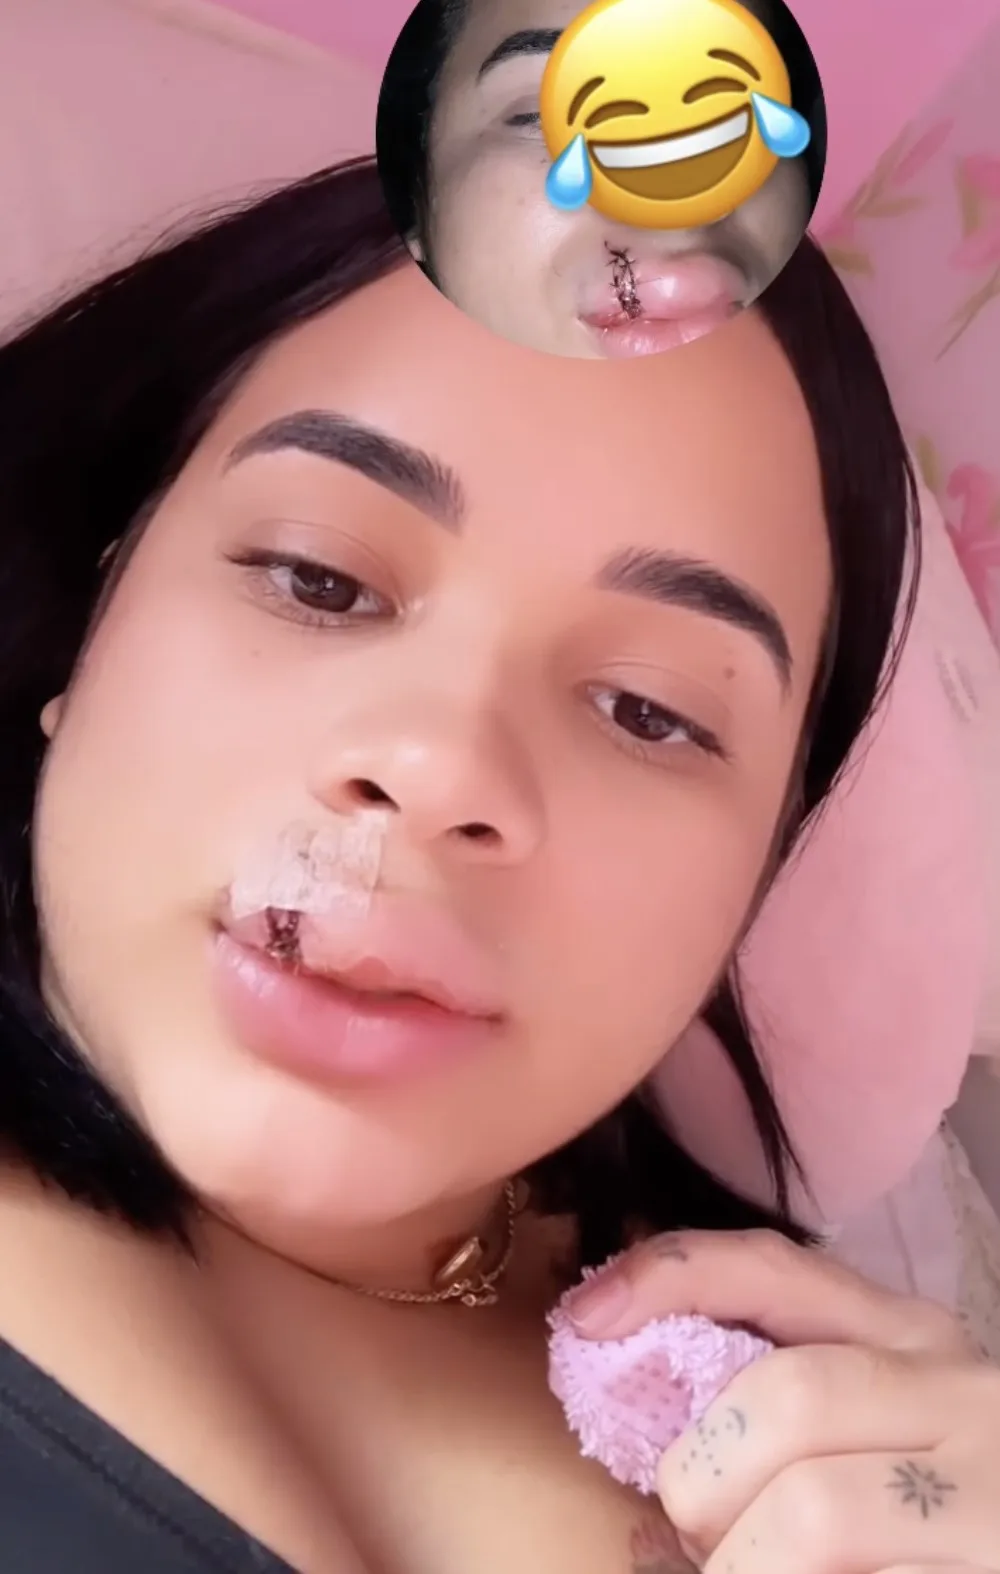 Model Eryka Costa shares her story after her pet dog bit off part of her lip when she tried to kiss it. Despite the incident, she still loves her furry friend.